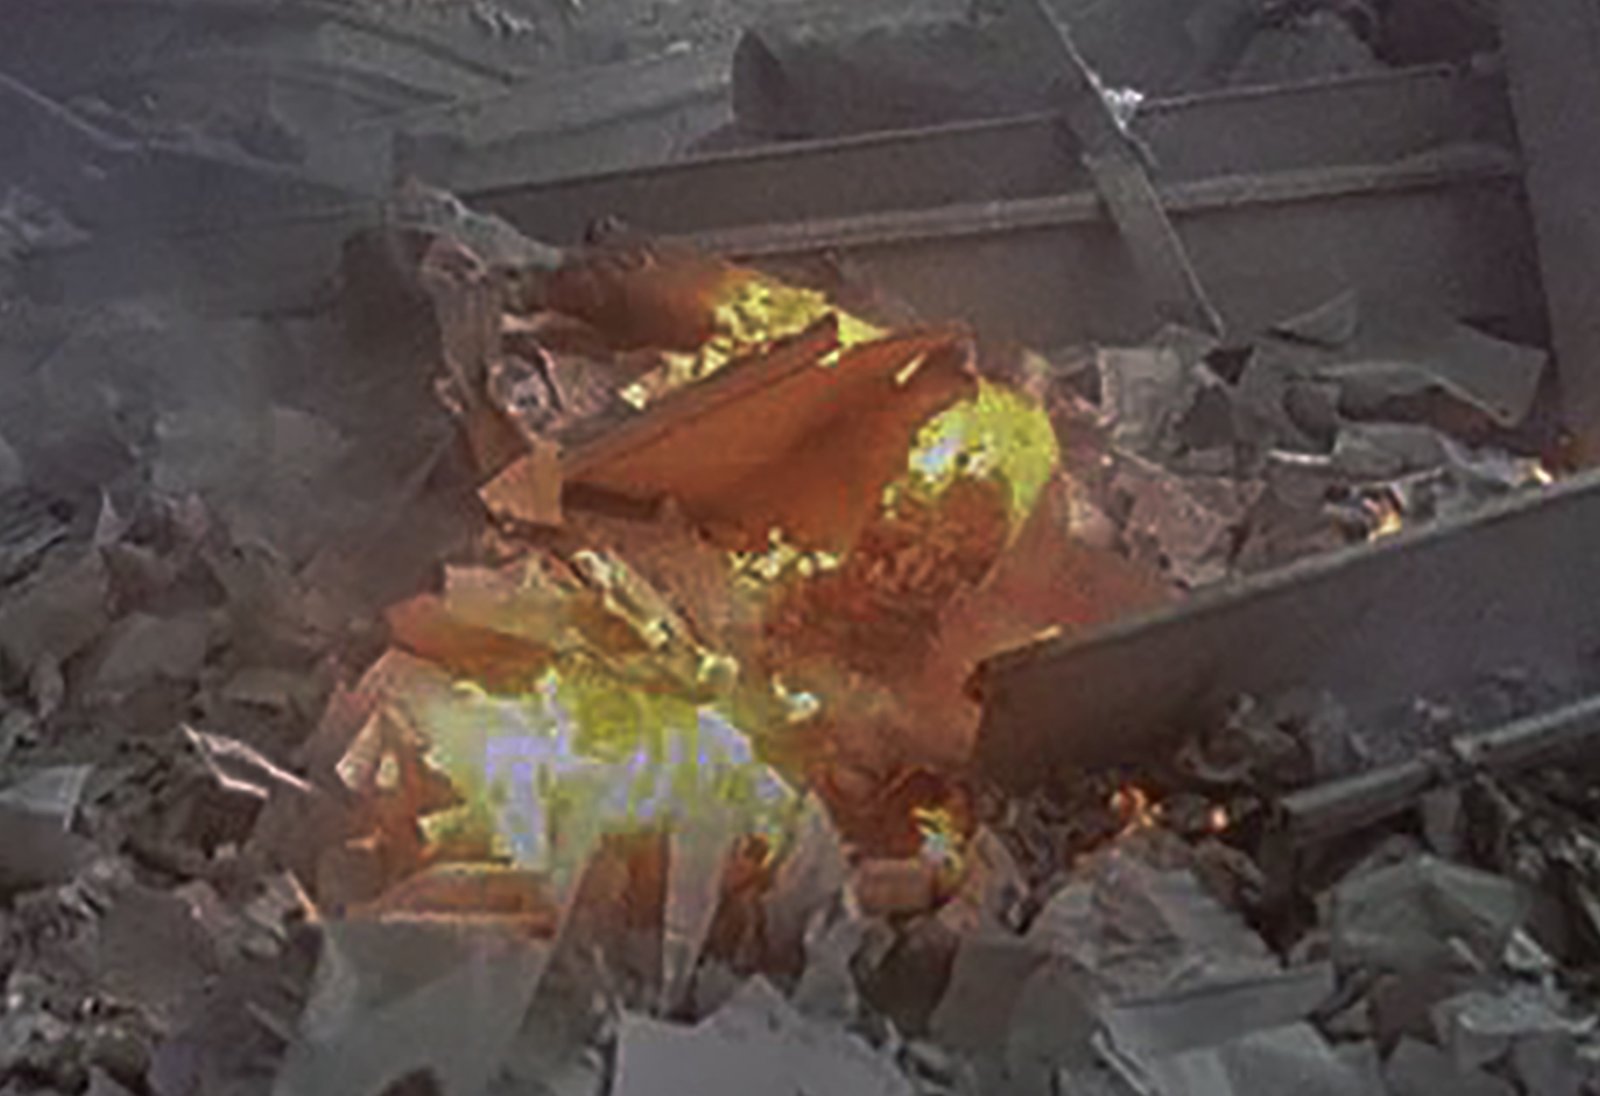 A Molten Metal 9/11 Photo - Is Just Burning Paper | Metabunk